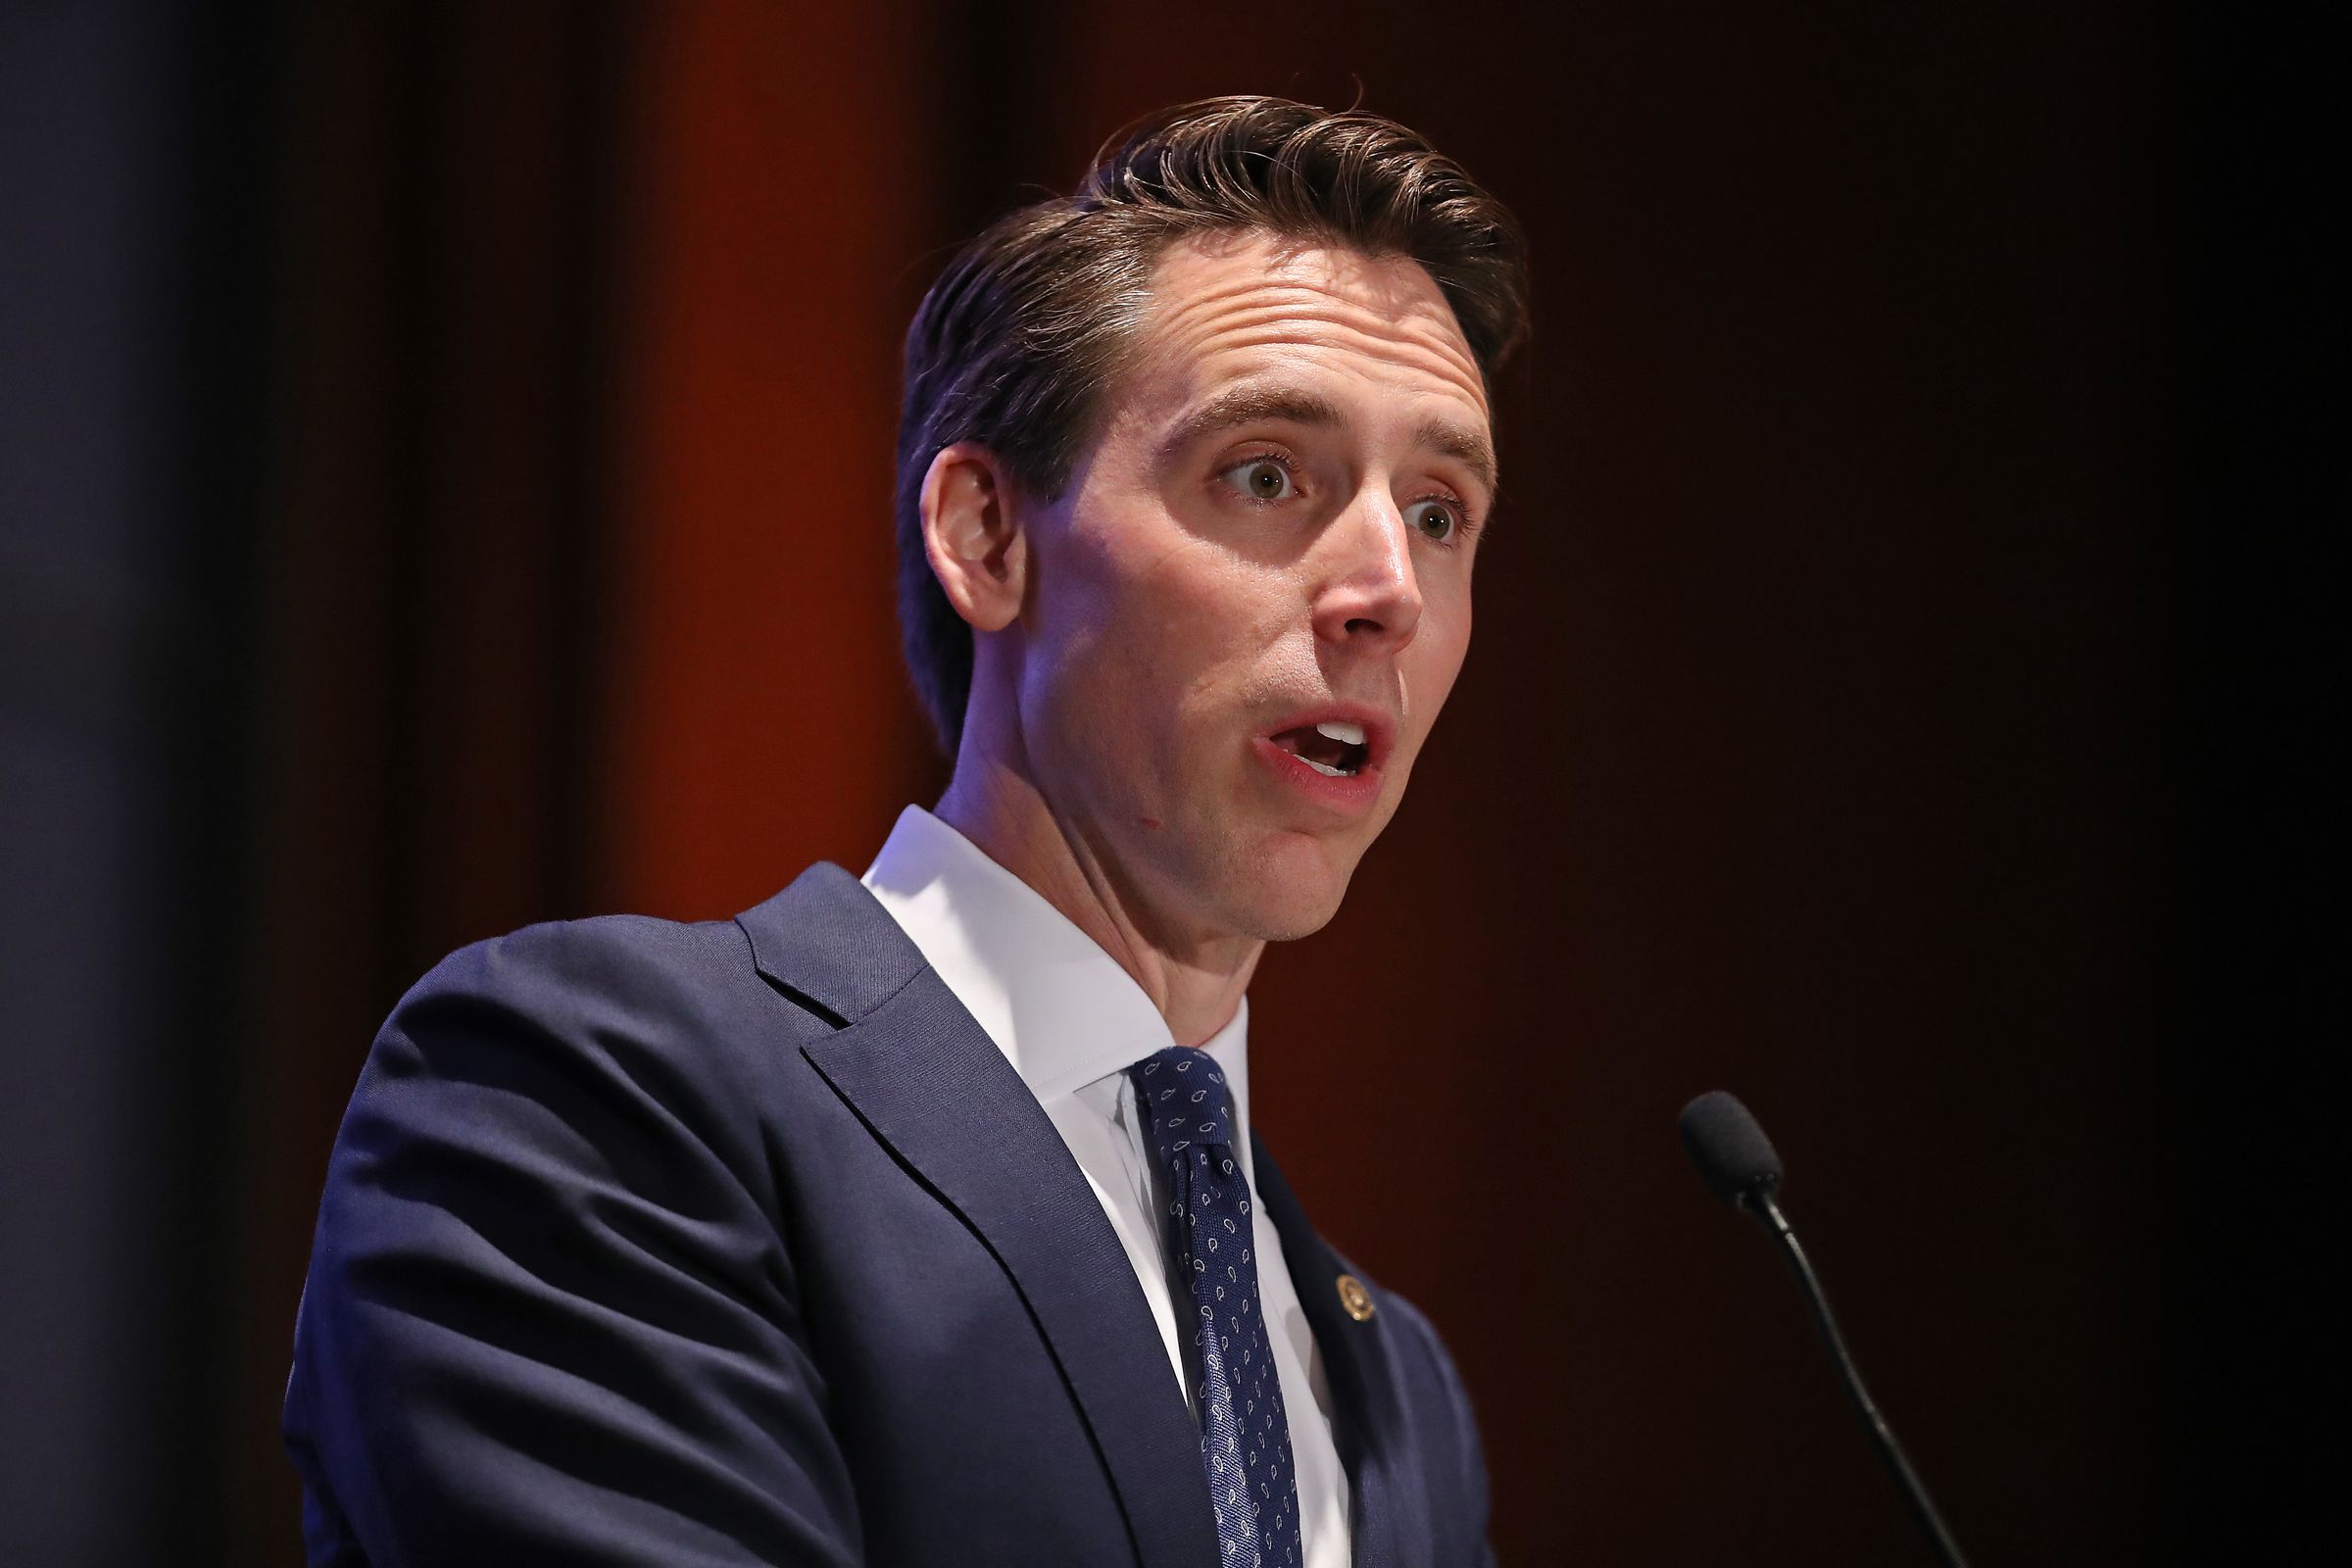 Sen. Josh Hawley (R-MO) addresses an audience in Washington, DC. He’s the force behind new legislation targeting social networks